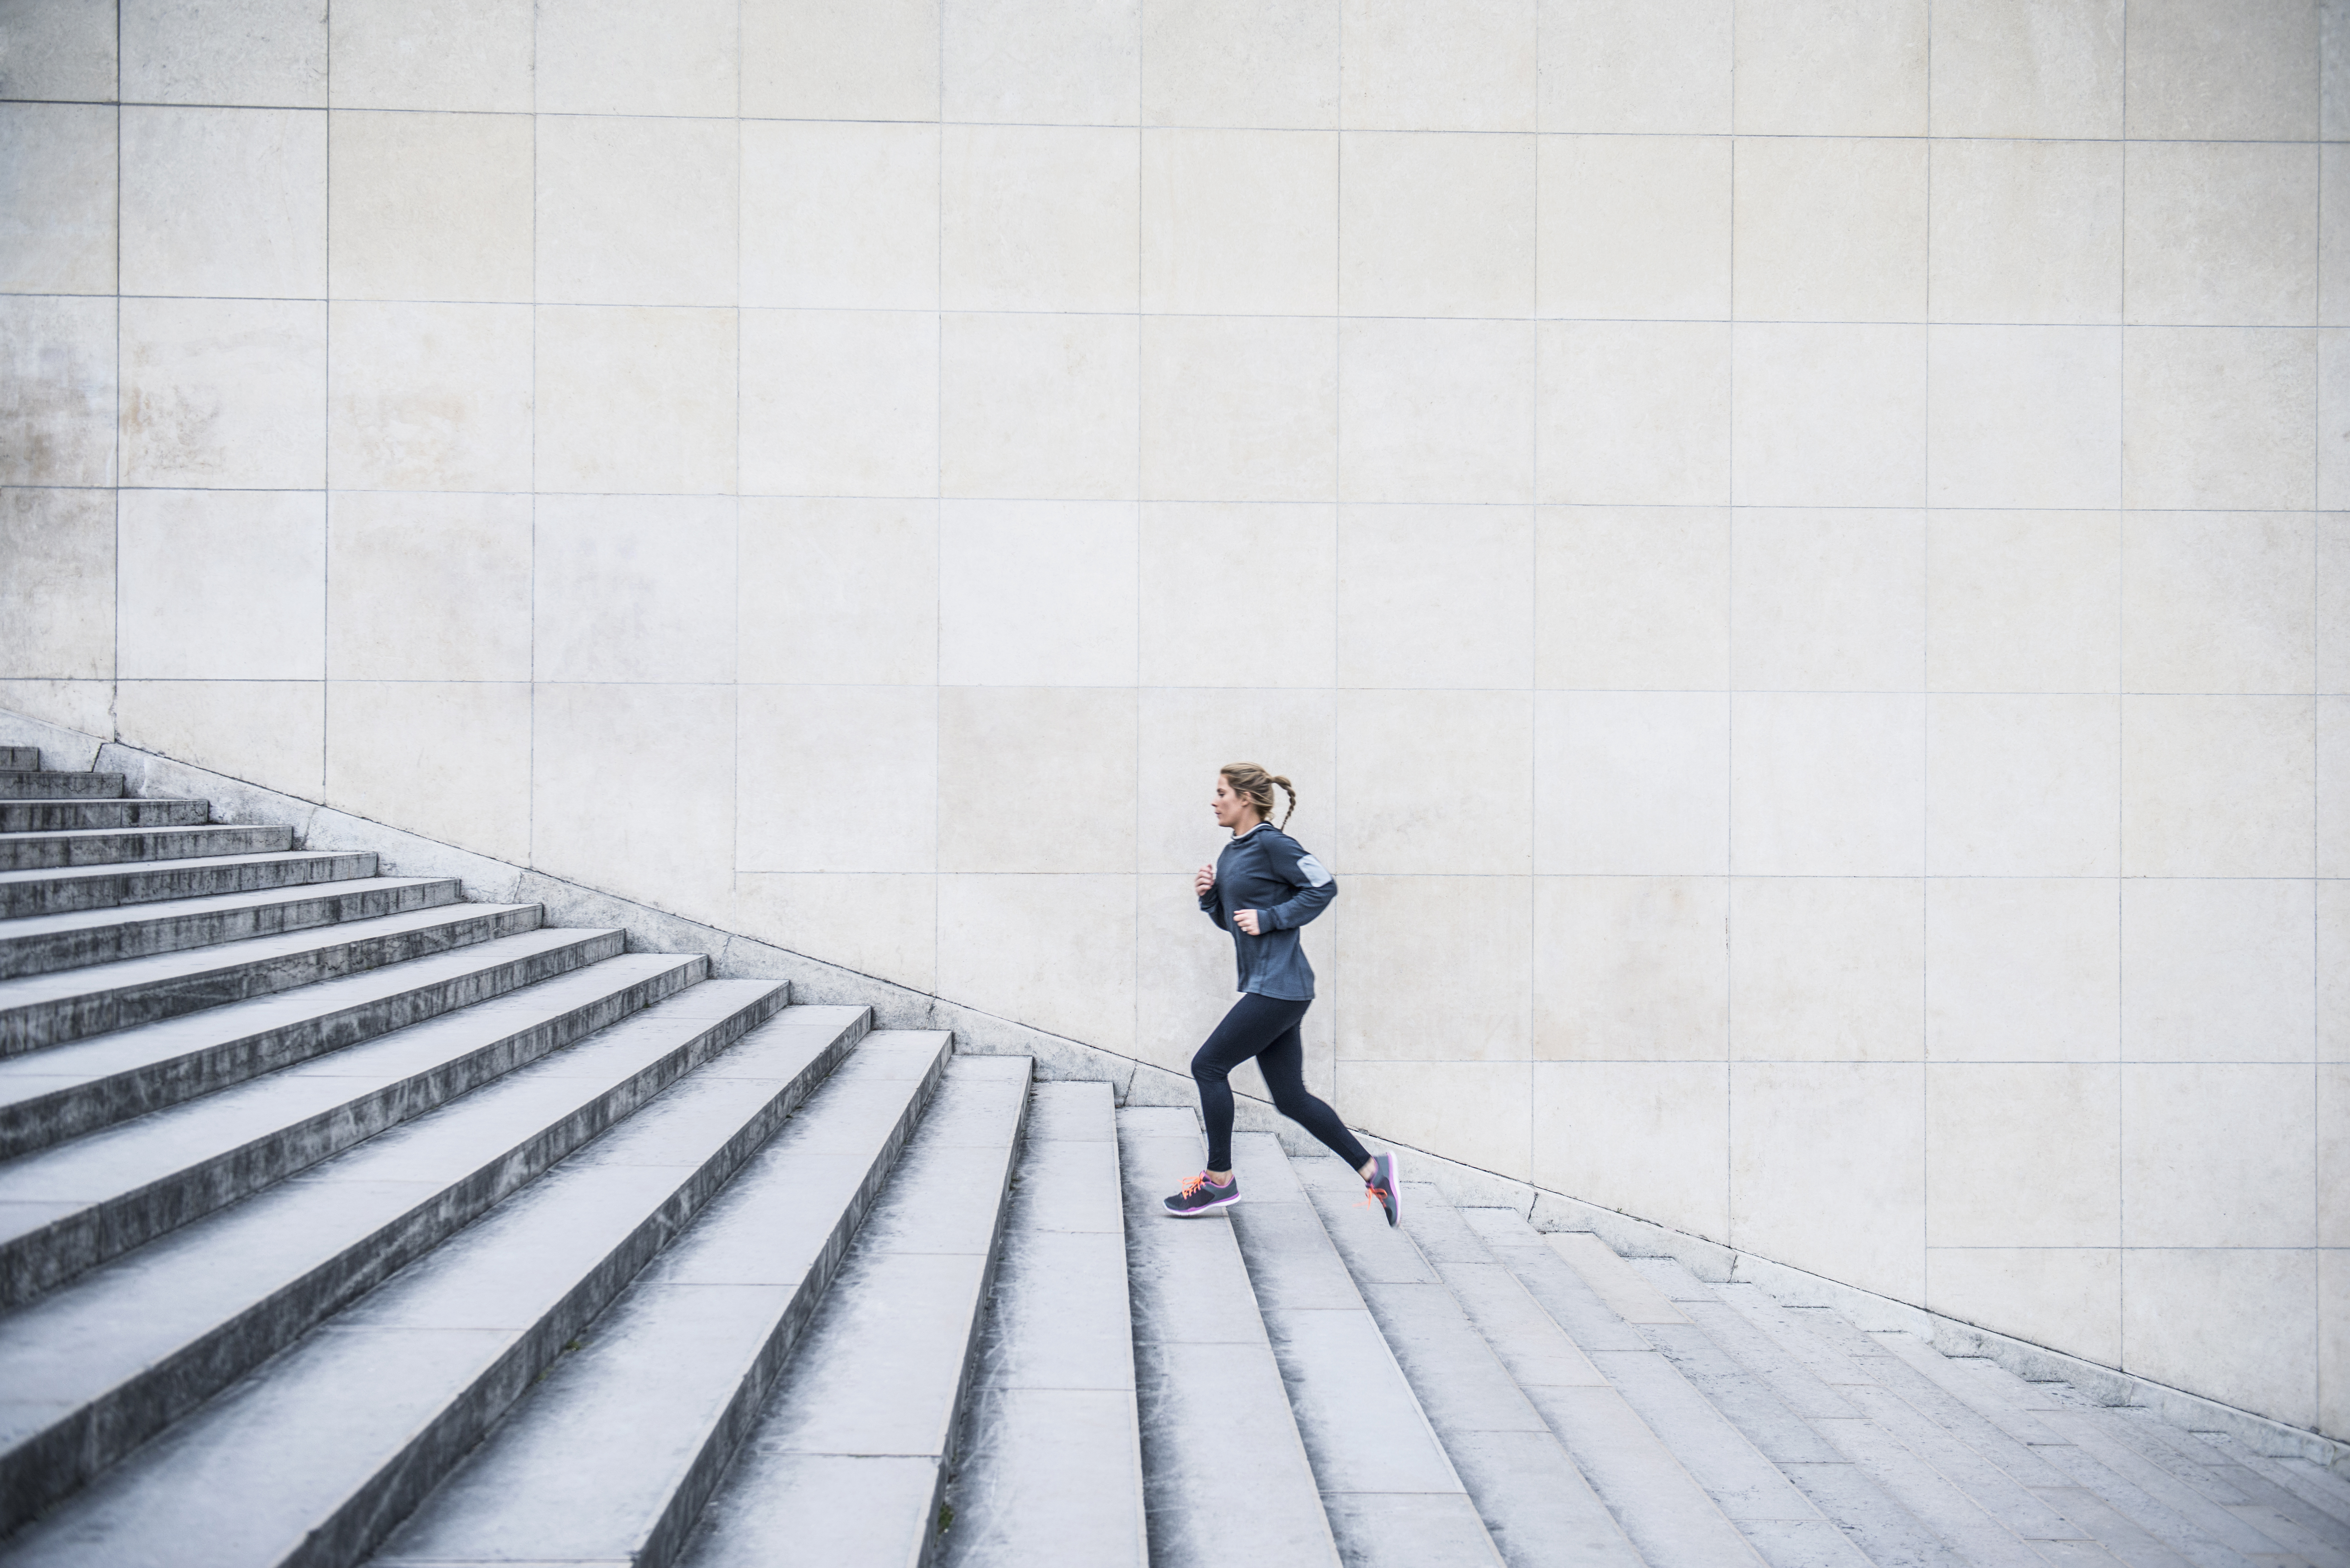 Stair Climbing Calculator: Calculate Elevation Gain and More - Fit For Trips